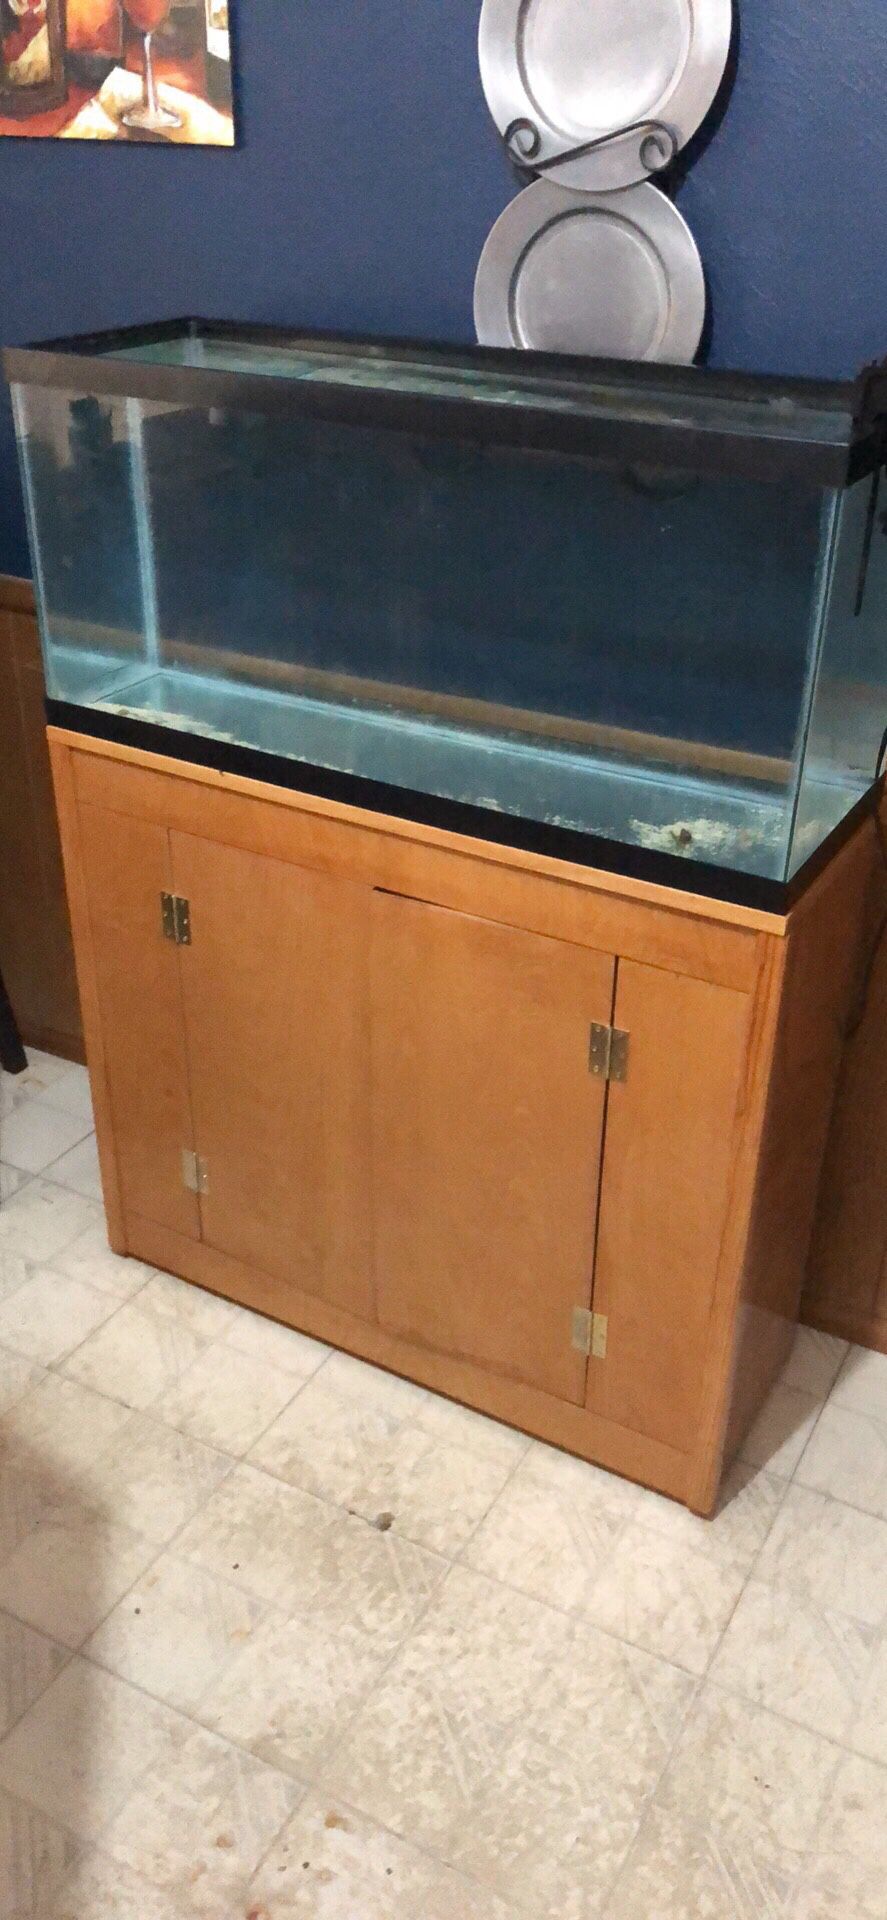 30 Gallon aquarium With Stand And filter.